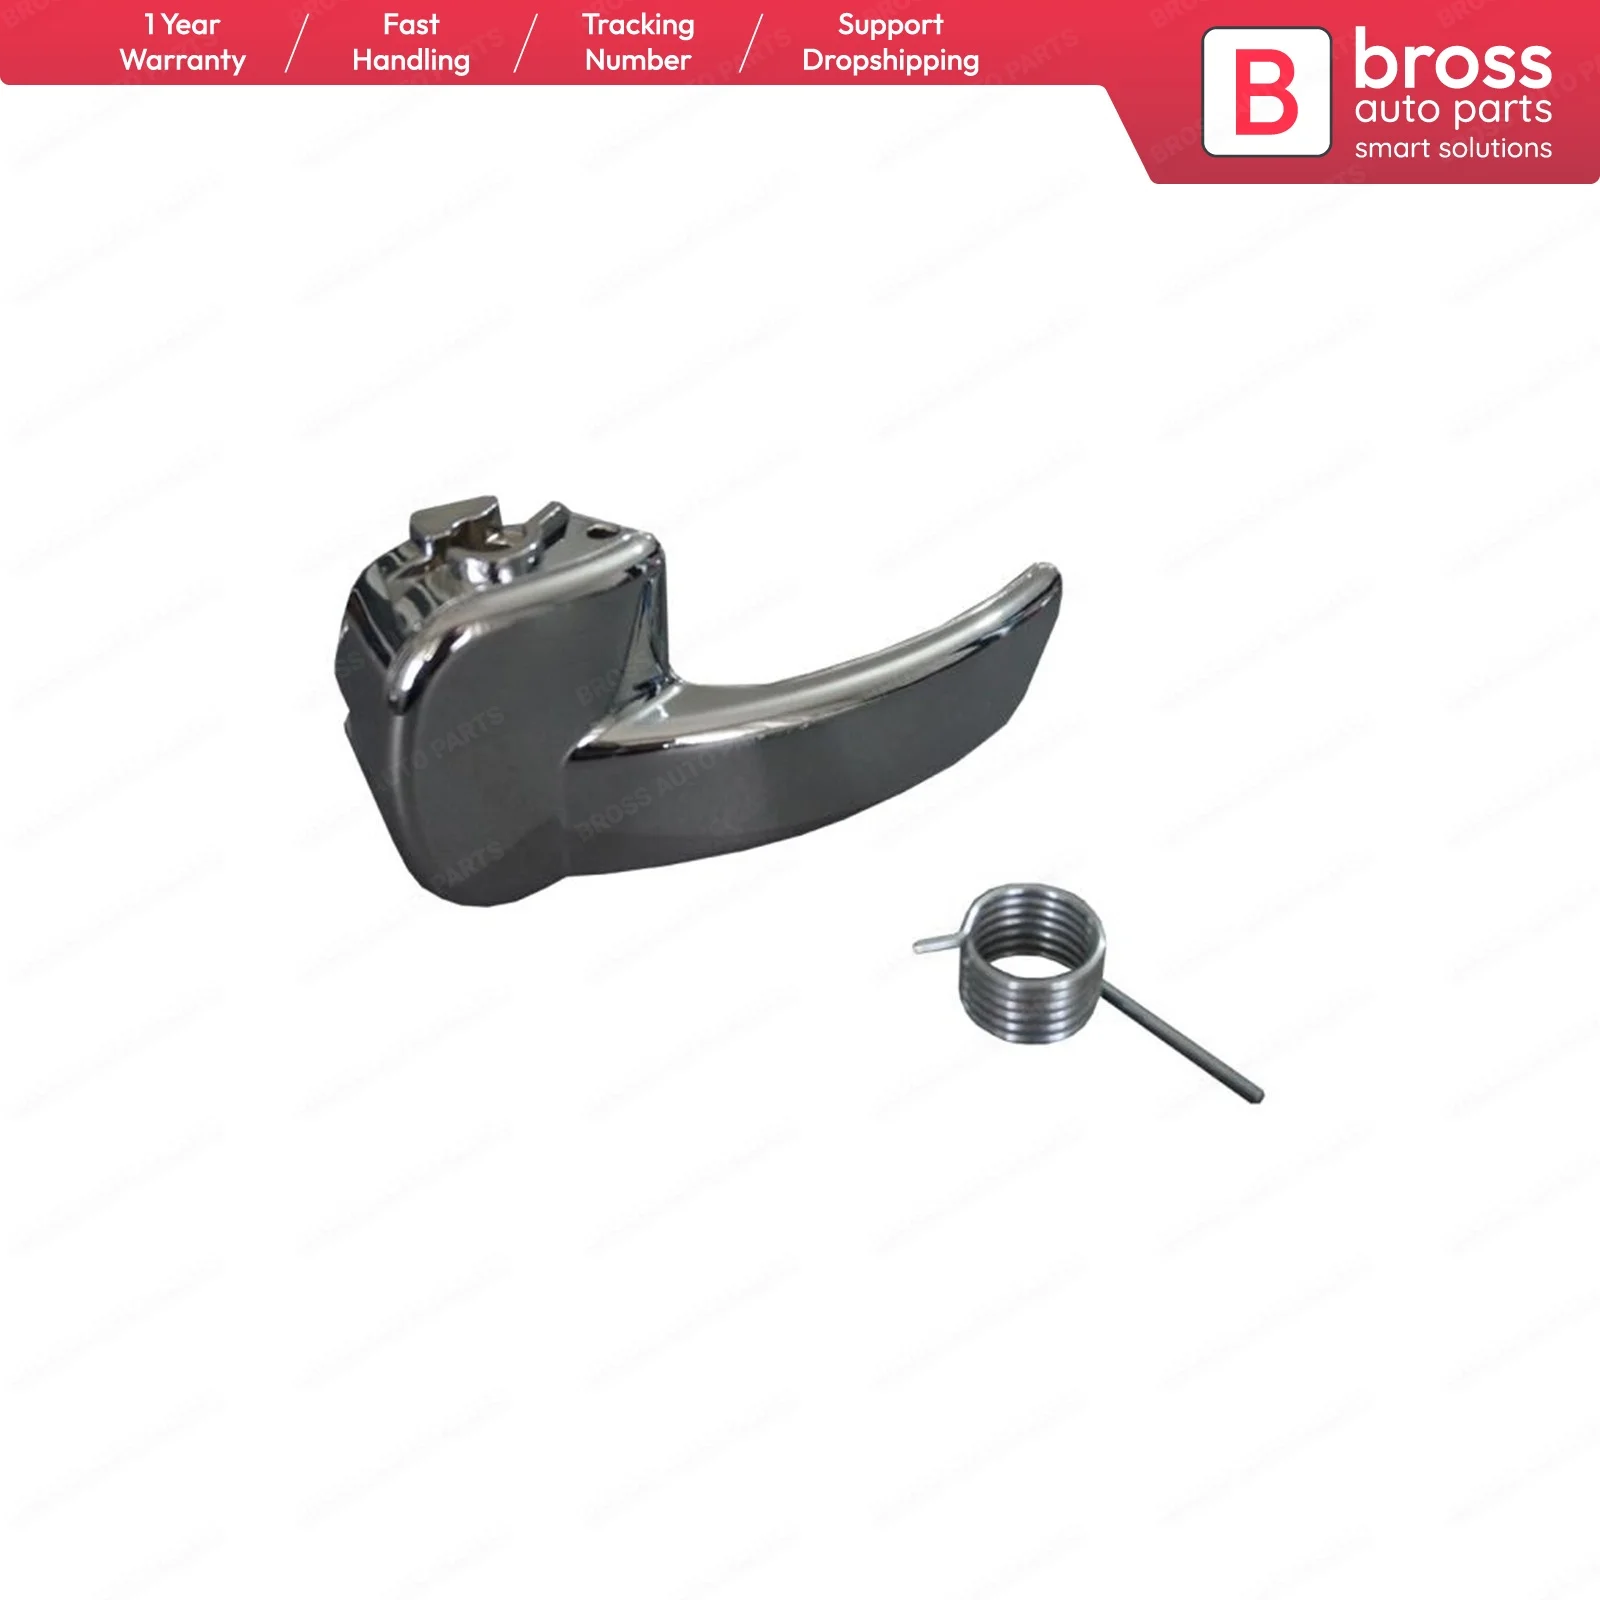 

Bross BDP916 Interior Front or Rear Left Side Door Chrome Handle For Nissan Qashqai 2007-2013 J10 Dualis 80670JD00E, 80671JD00E